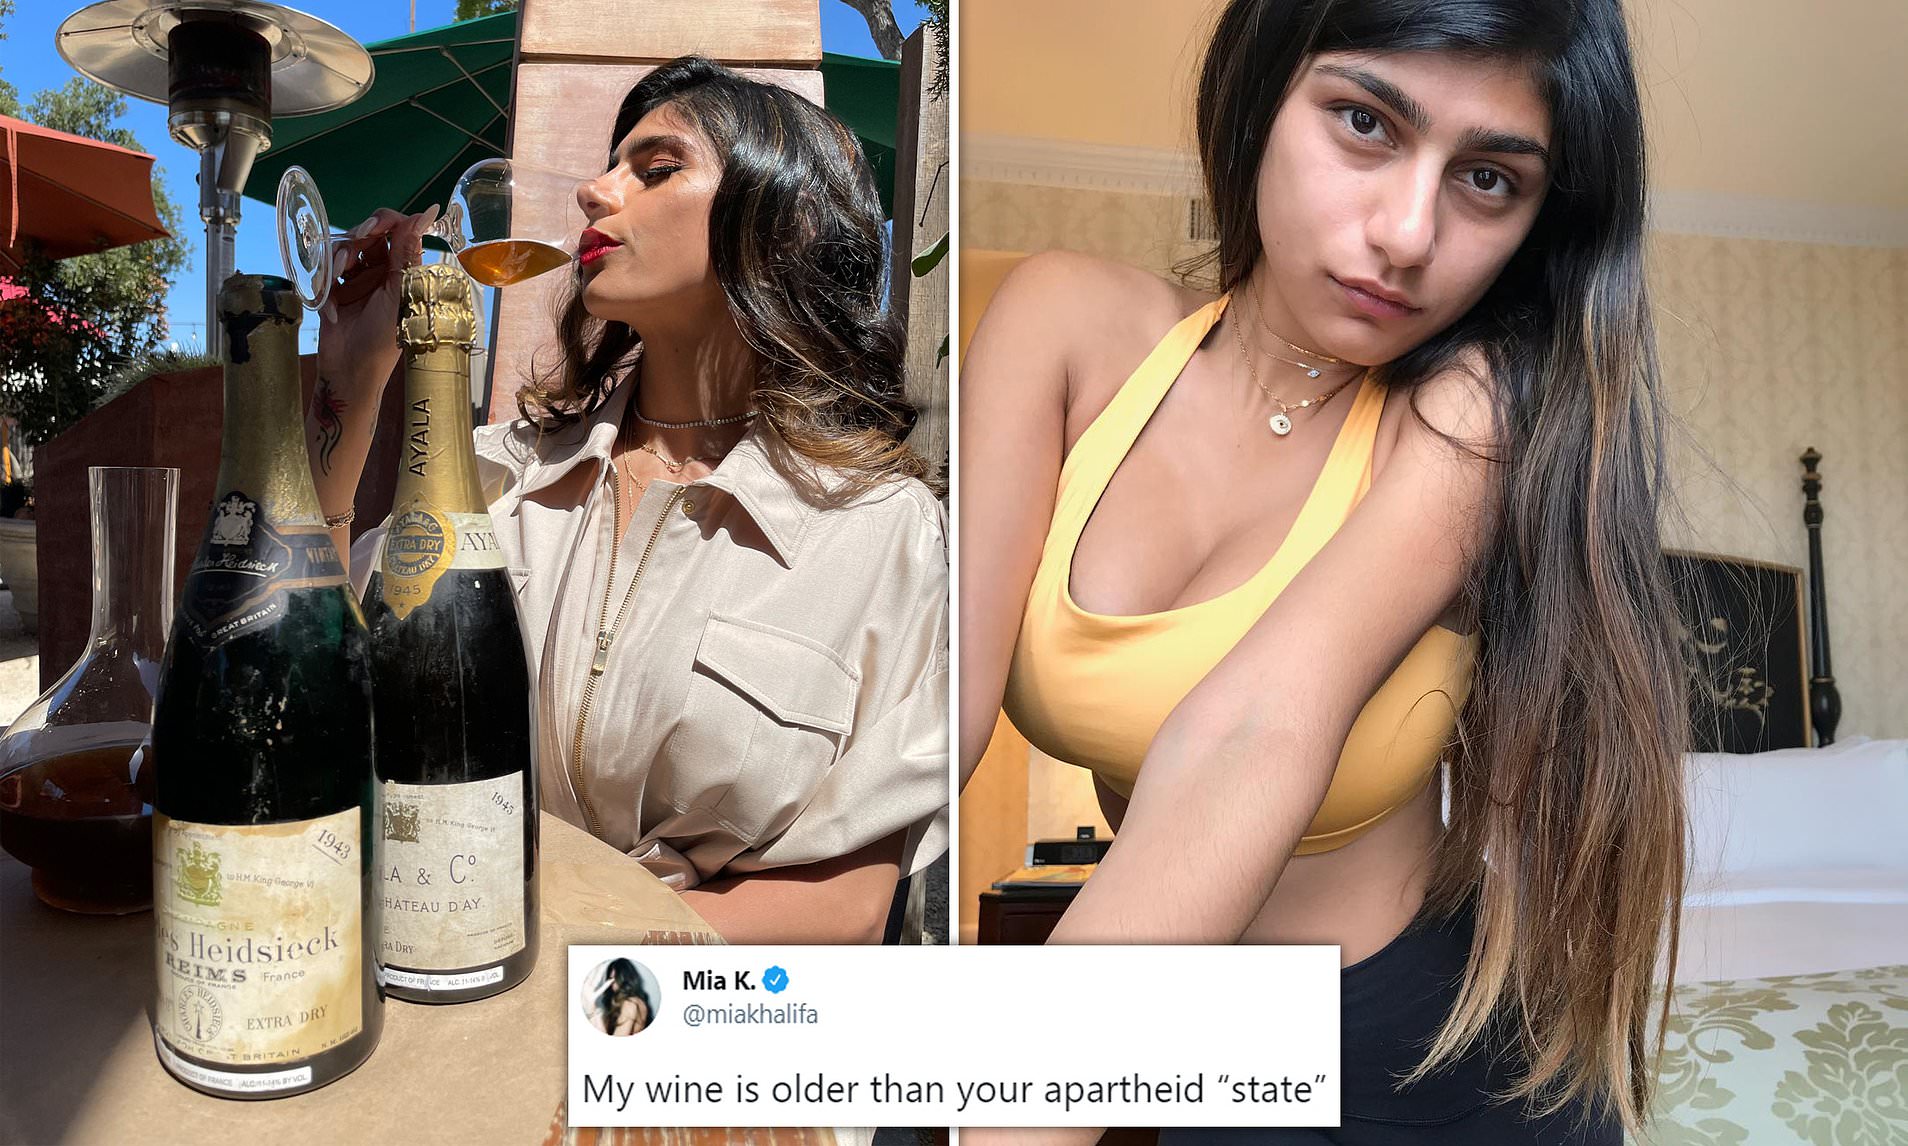 caleb paige recommends Young Mia Khalifa